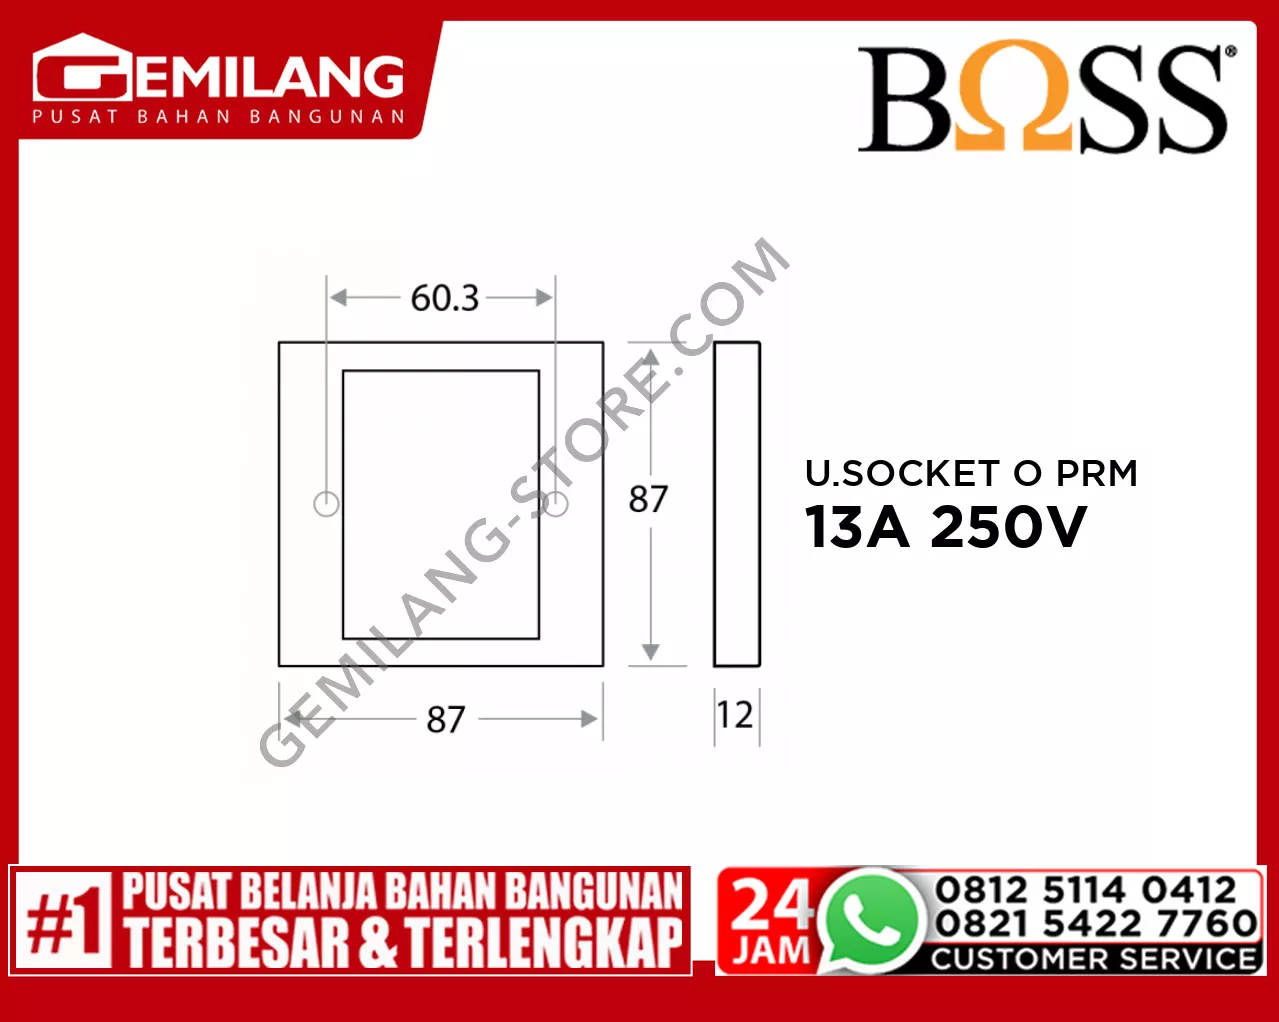 BOSS UNIVERSAL SOCKET OUTLET WITH SAFETY SHUTTER B30 PRIME 13A 250V B413S